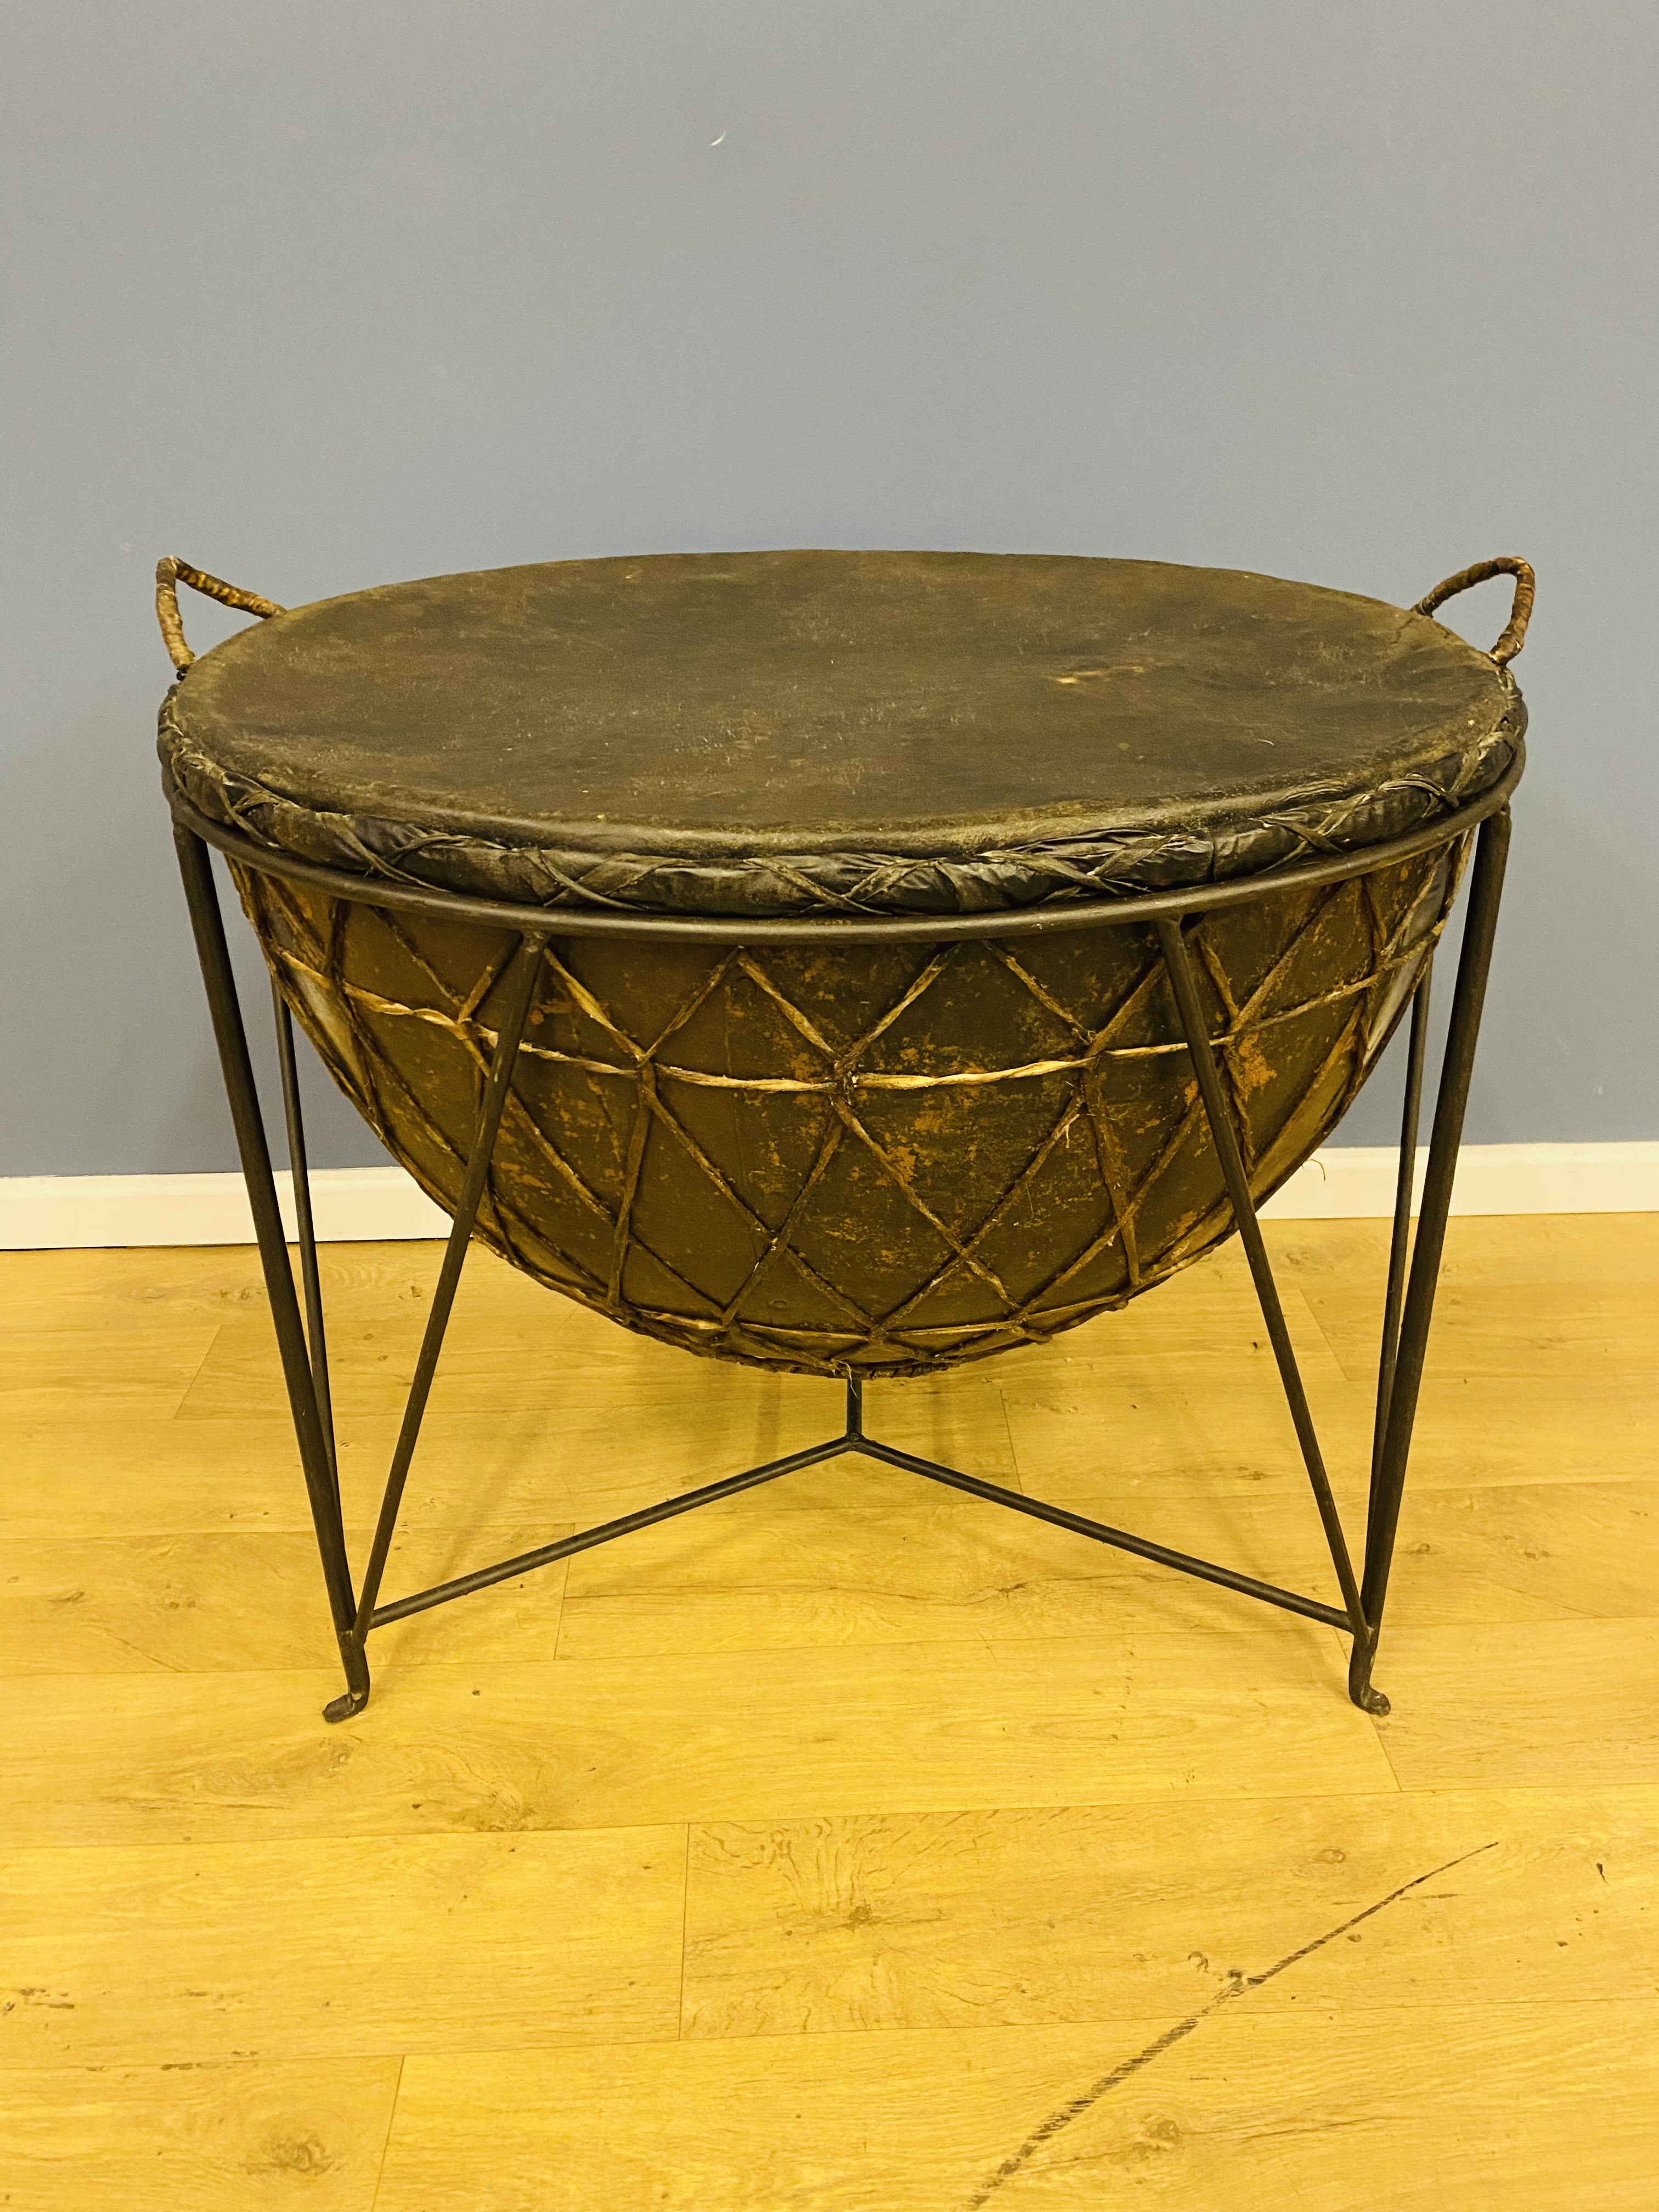 Contemporary African drum on metal stand